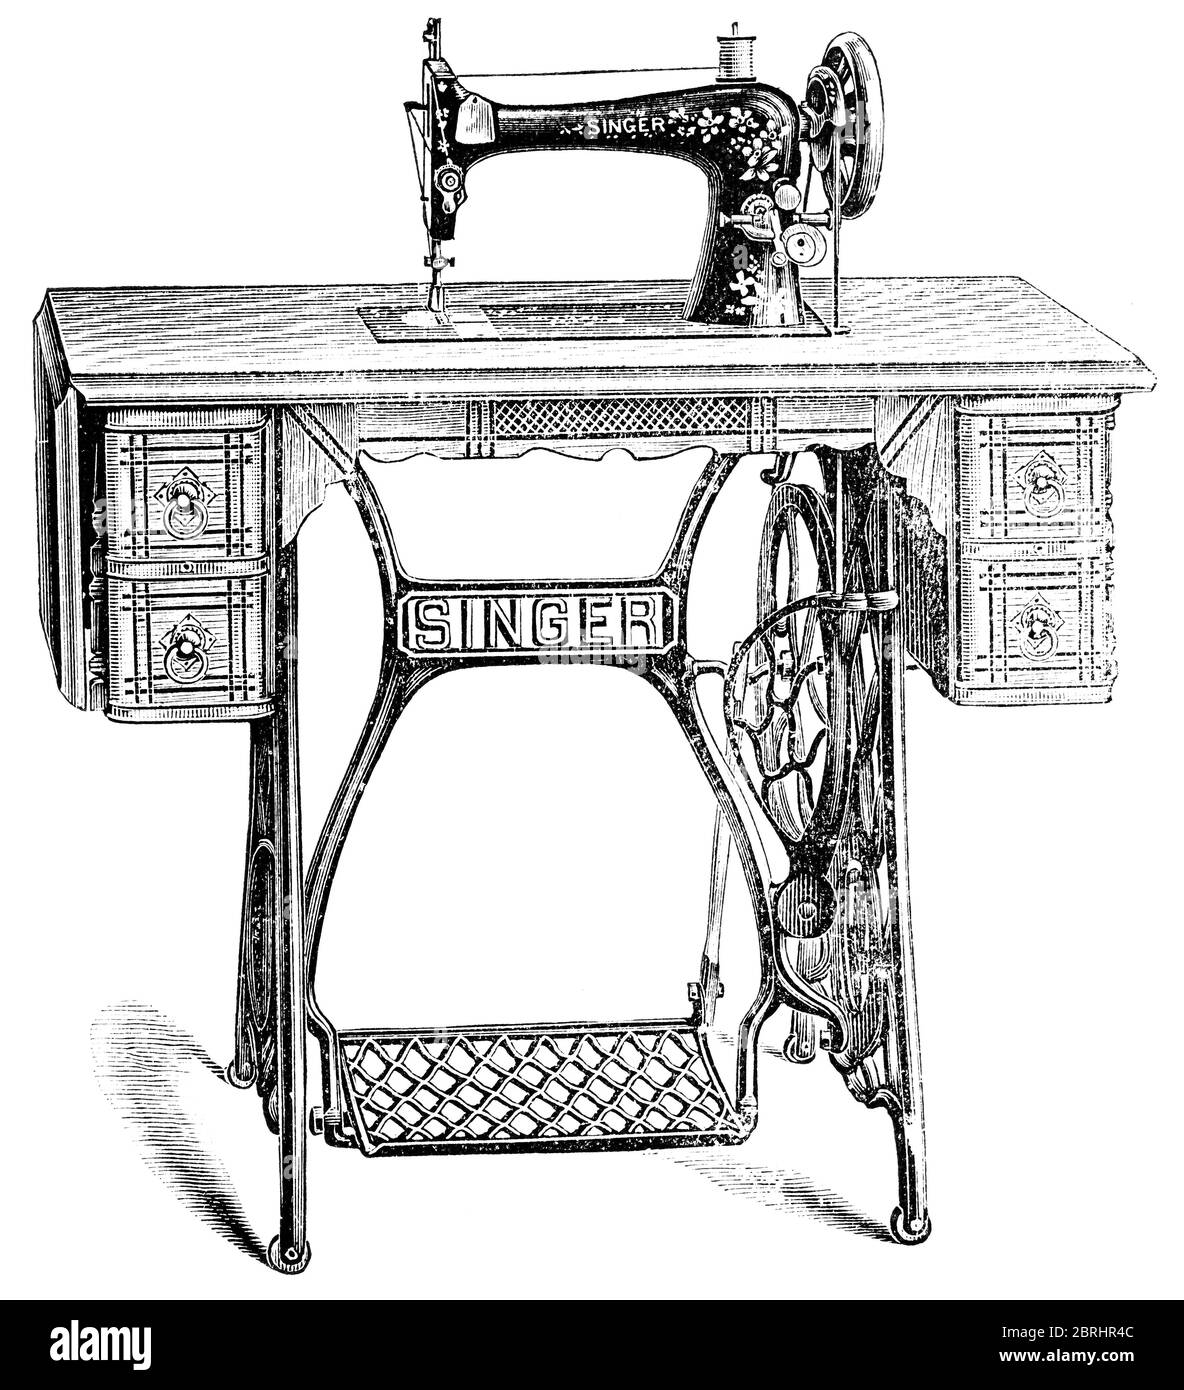 The vibrating shuttle model of Singer sewing machine. Illustration of the 19th century. White background. Stock Photo